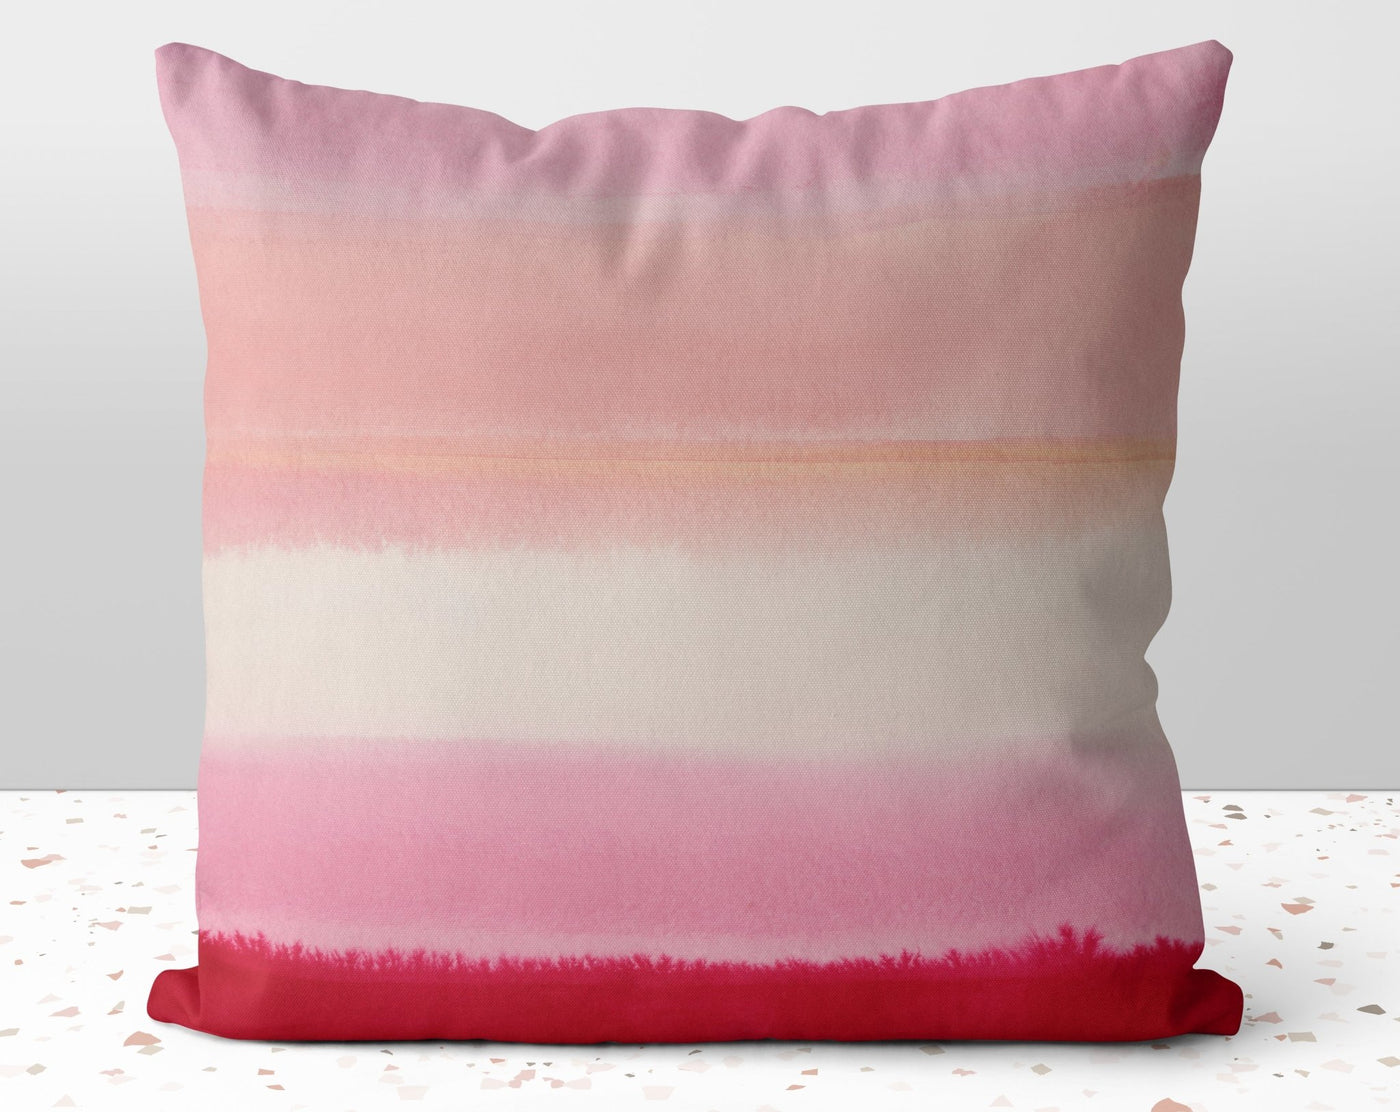 Abstract Pink Strawberry Sunset Landscape Stripes Pillow Throw Cover with Insert - Cush Potato Pillows